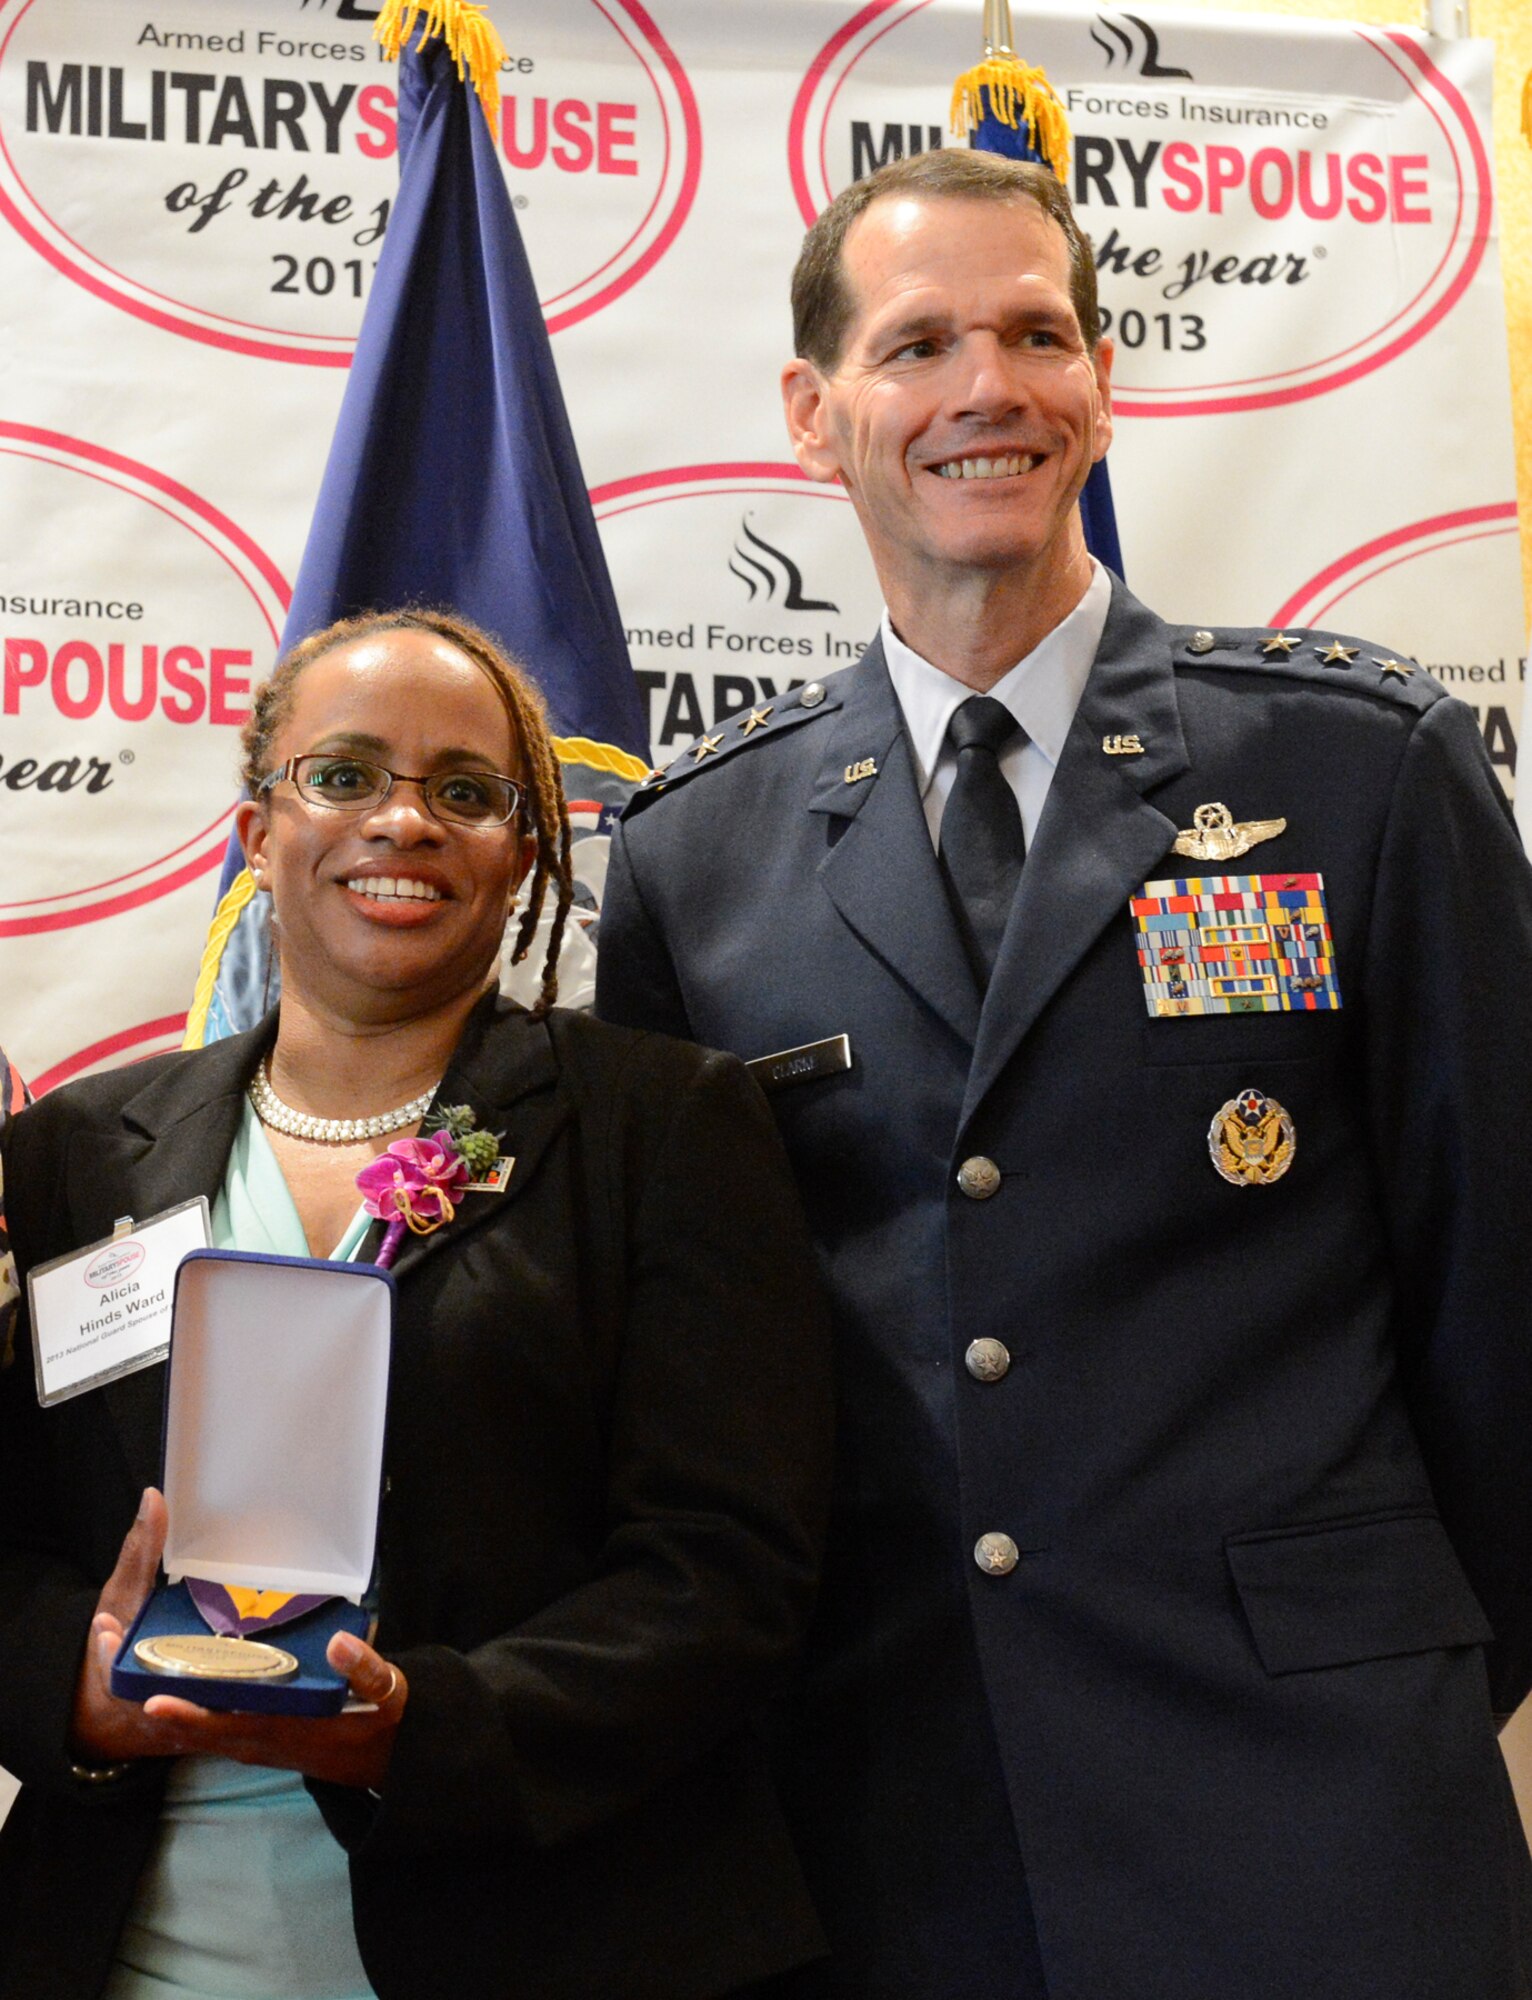 Alicia Hinds Ward, 2013 National Guard Spouse of the Year, poses for a photo with Lt. Gen. Stanley E. Clarke III, the director of the Air National Guard after winning the 2013 Military Spouse of the Year award, in Arlington, Va., May 9, 2013. The awards, presented by Military Spouse magazine and sponsored by Armed Forces Insurance, honor spouses of military members. (Air Force photo by Scott Ash)